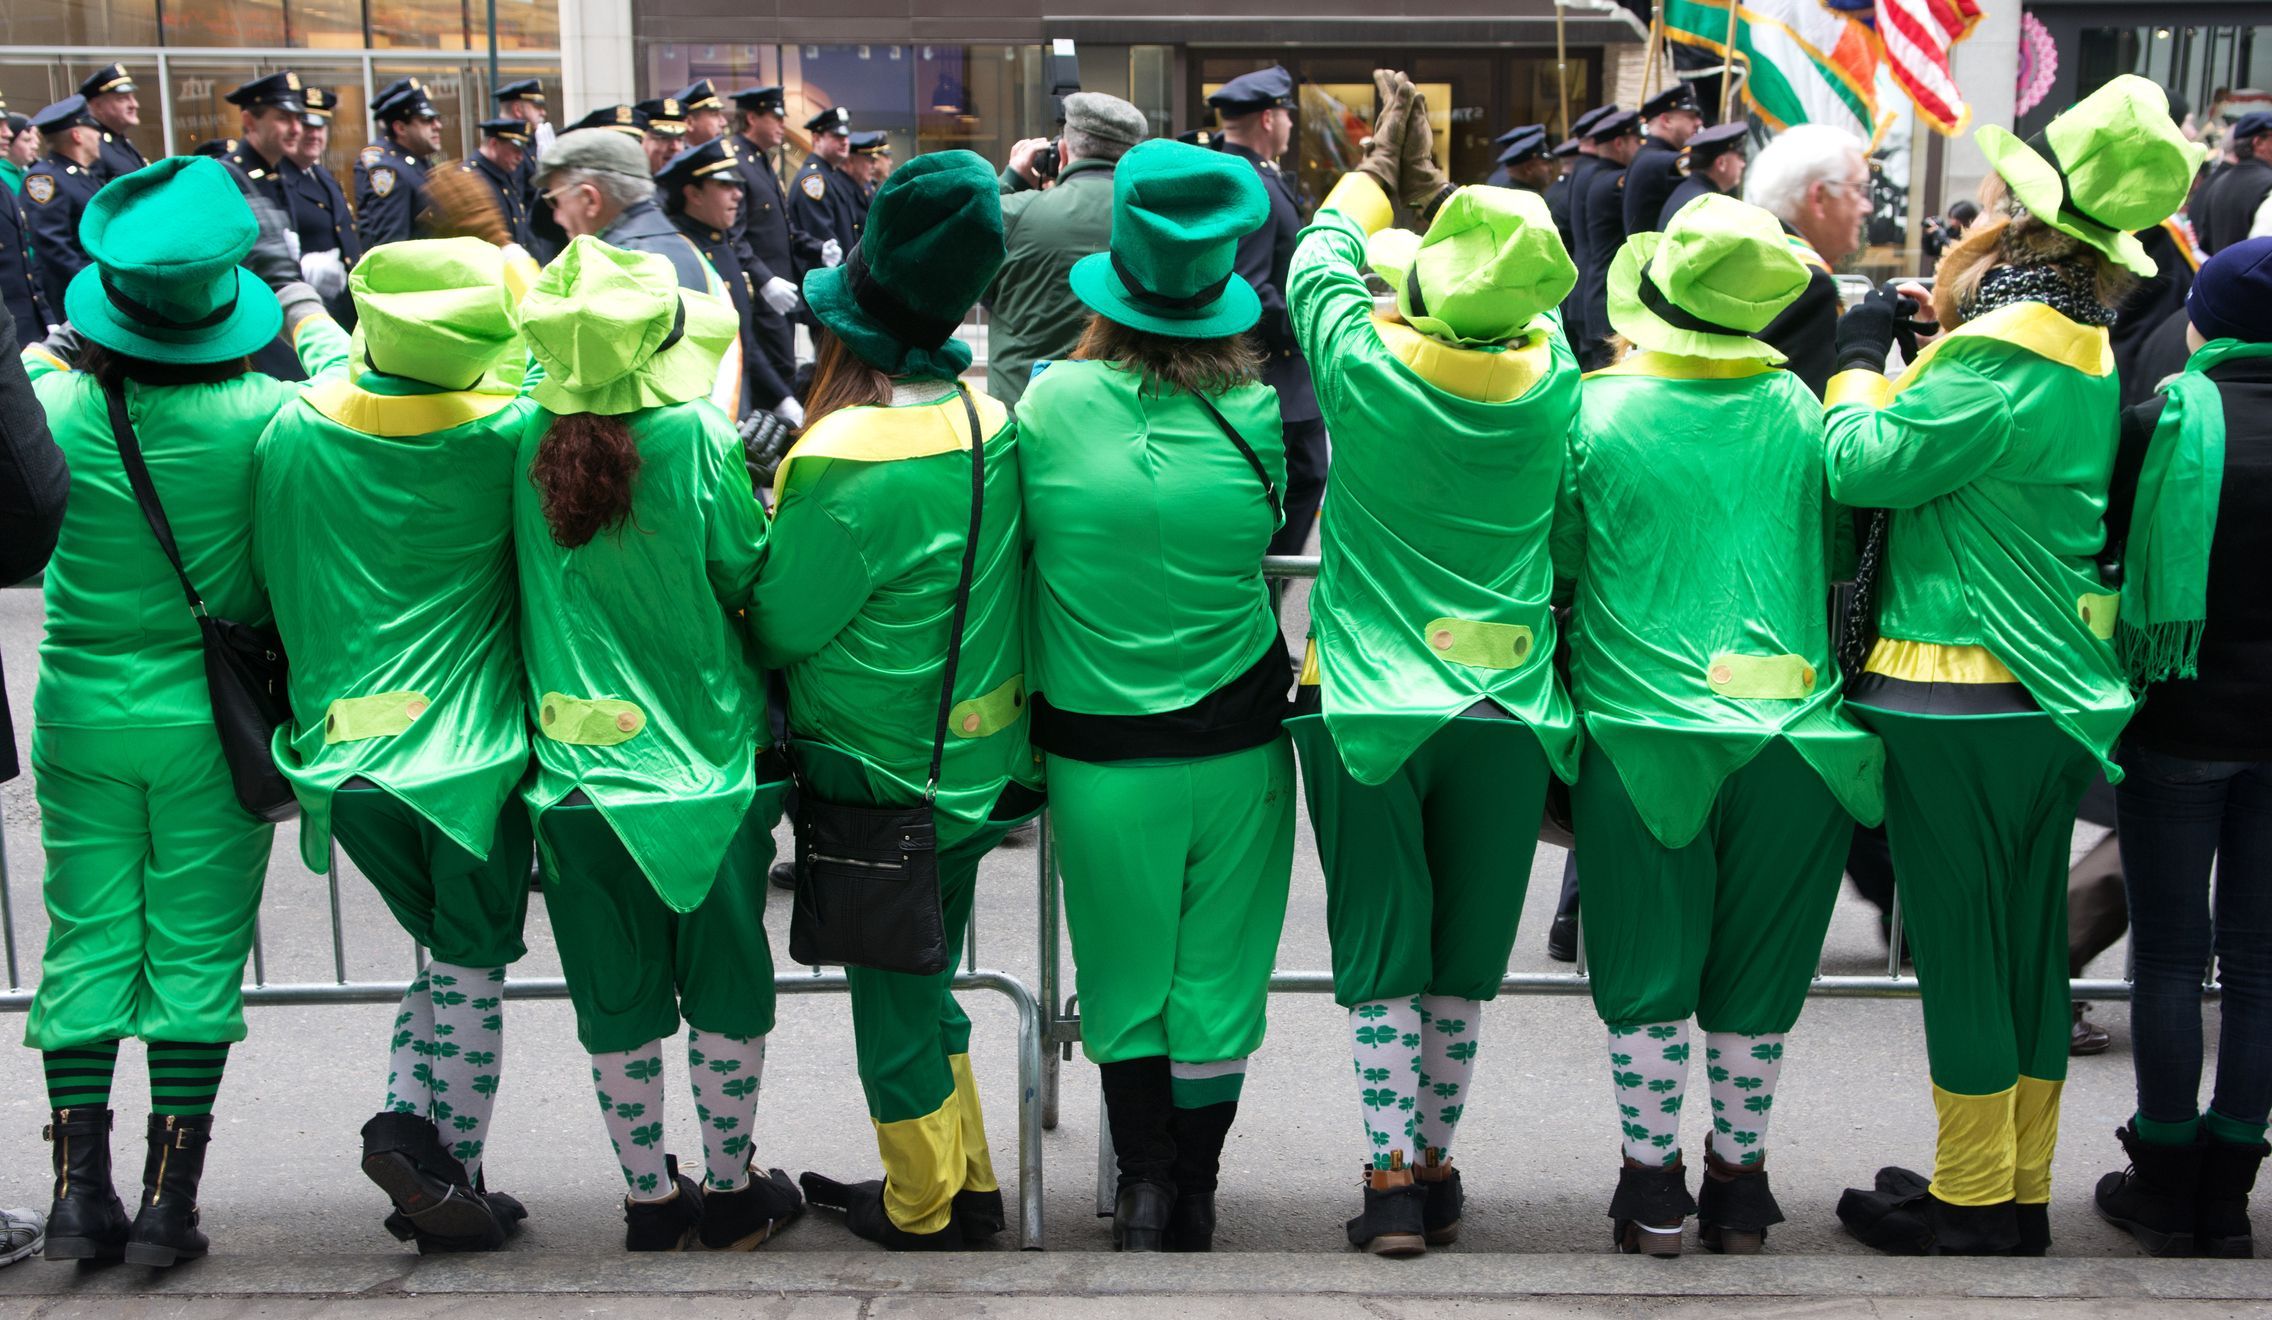 St. Patrick's Day in the USA - Origin and Traditions